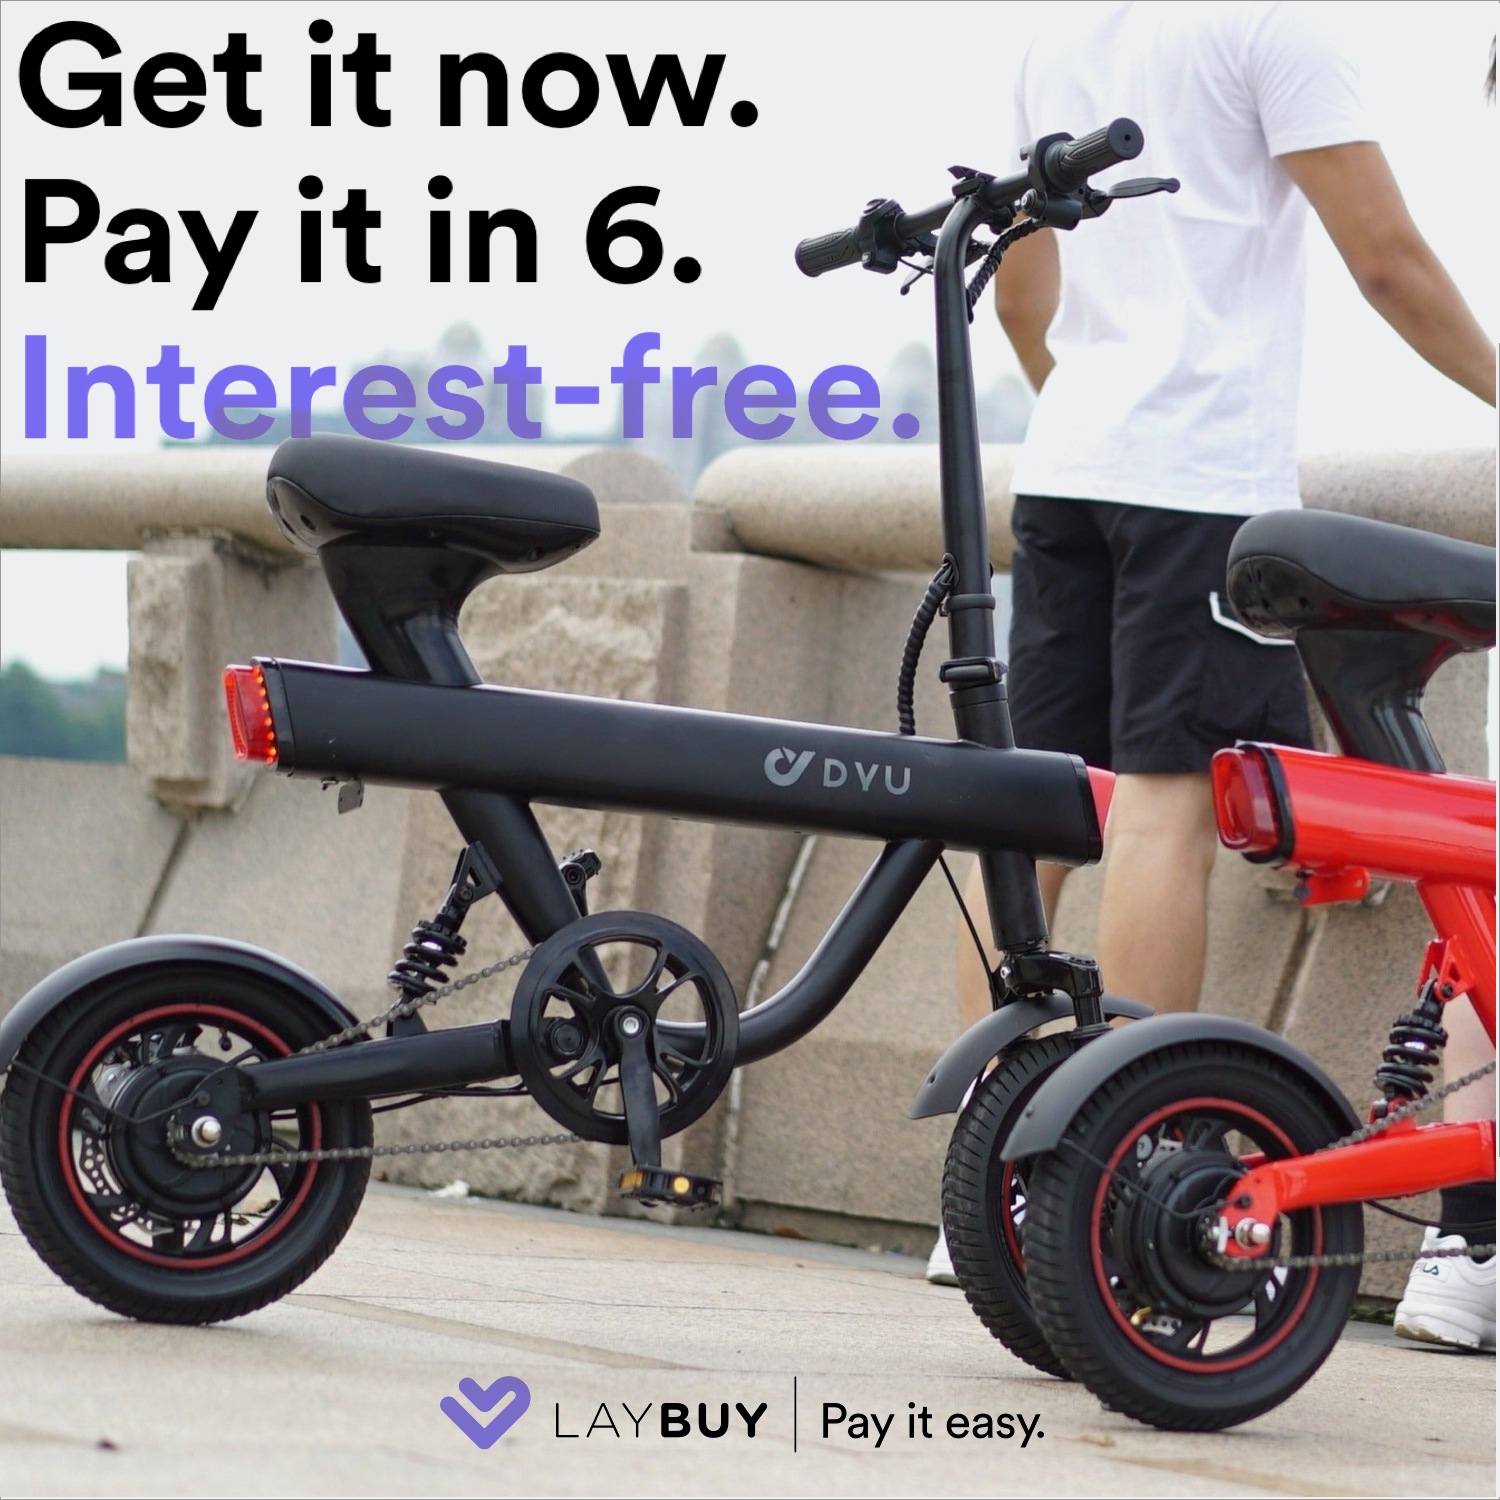 6 interest free payments. DYU V1 Electric Bike available at Ridezar